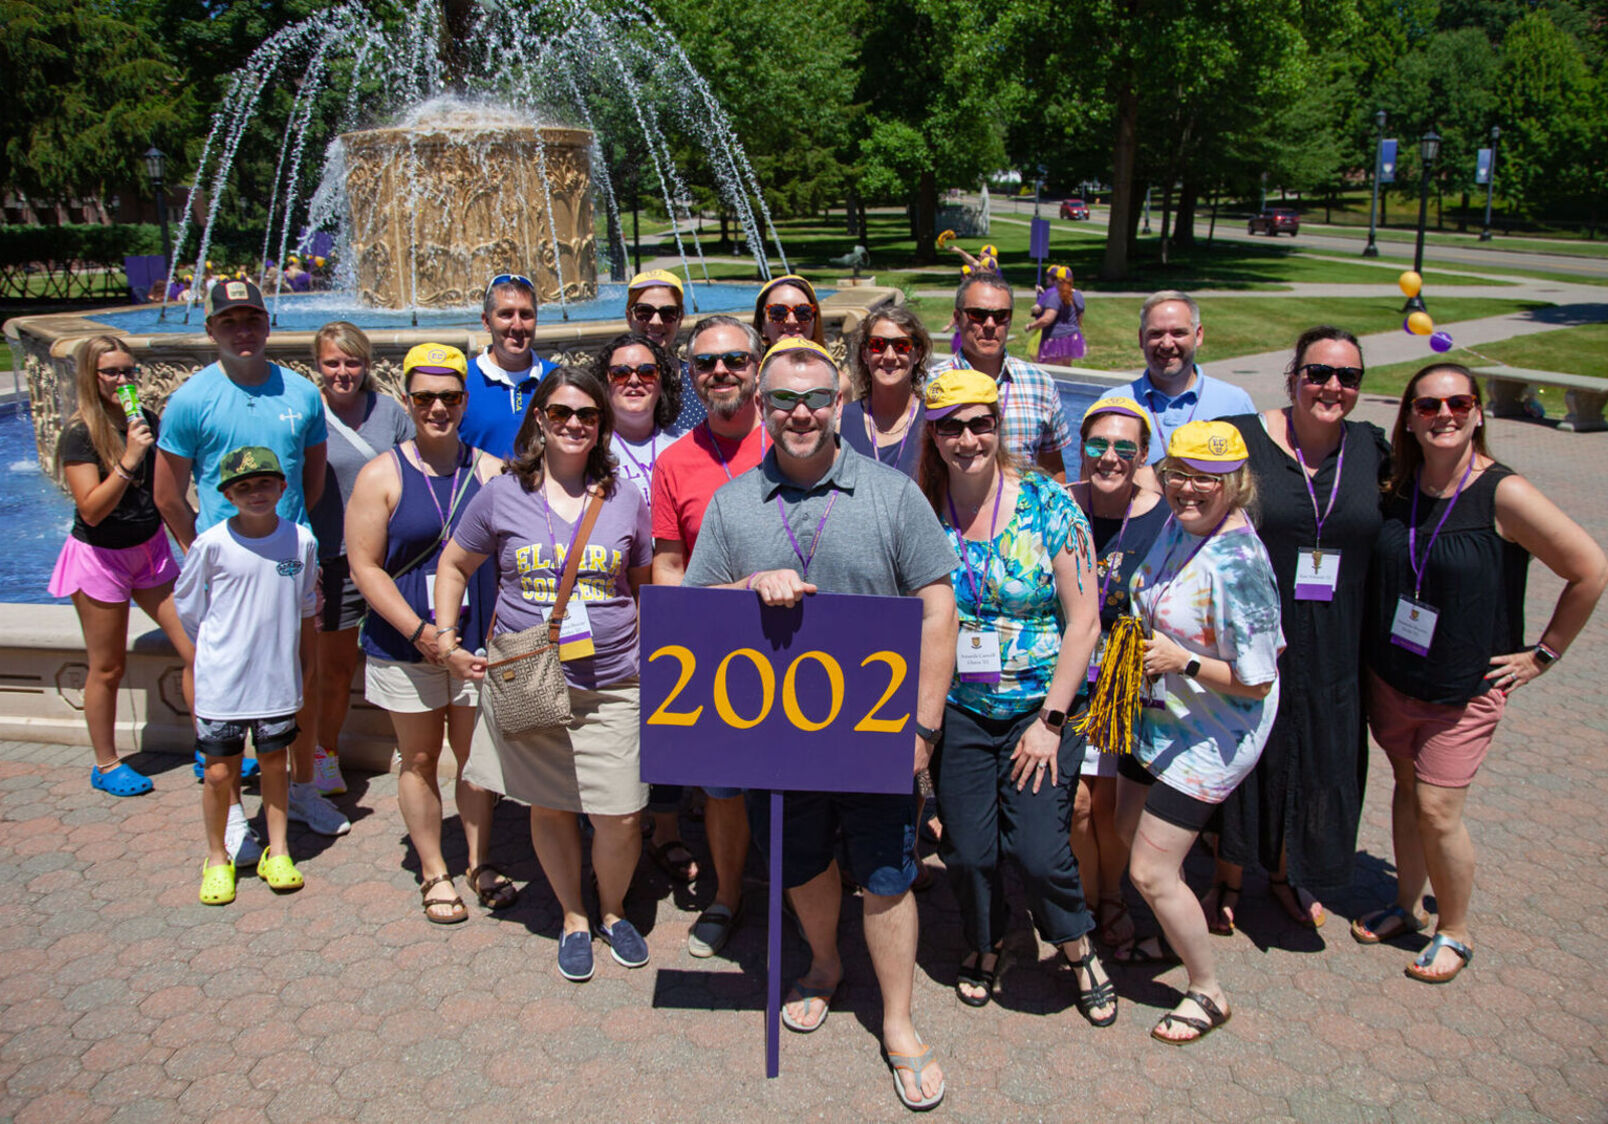 Members of the Class of 2022 pose with a 2002 sign during the alumni reunion parade